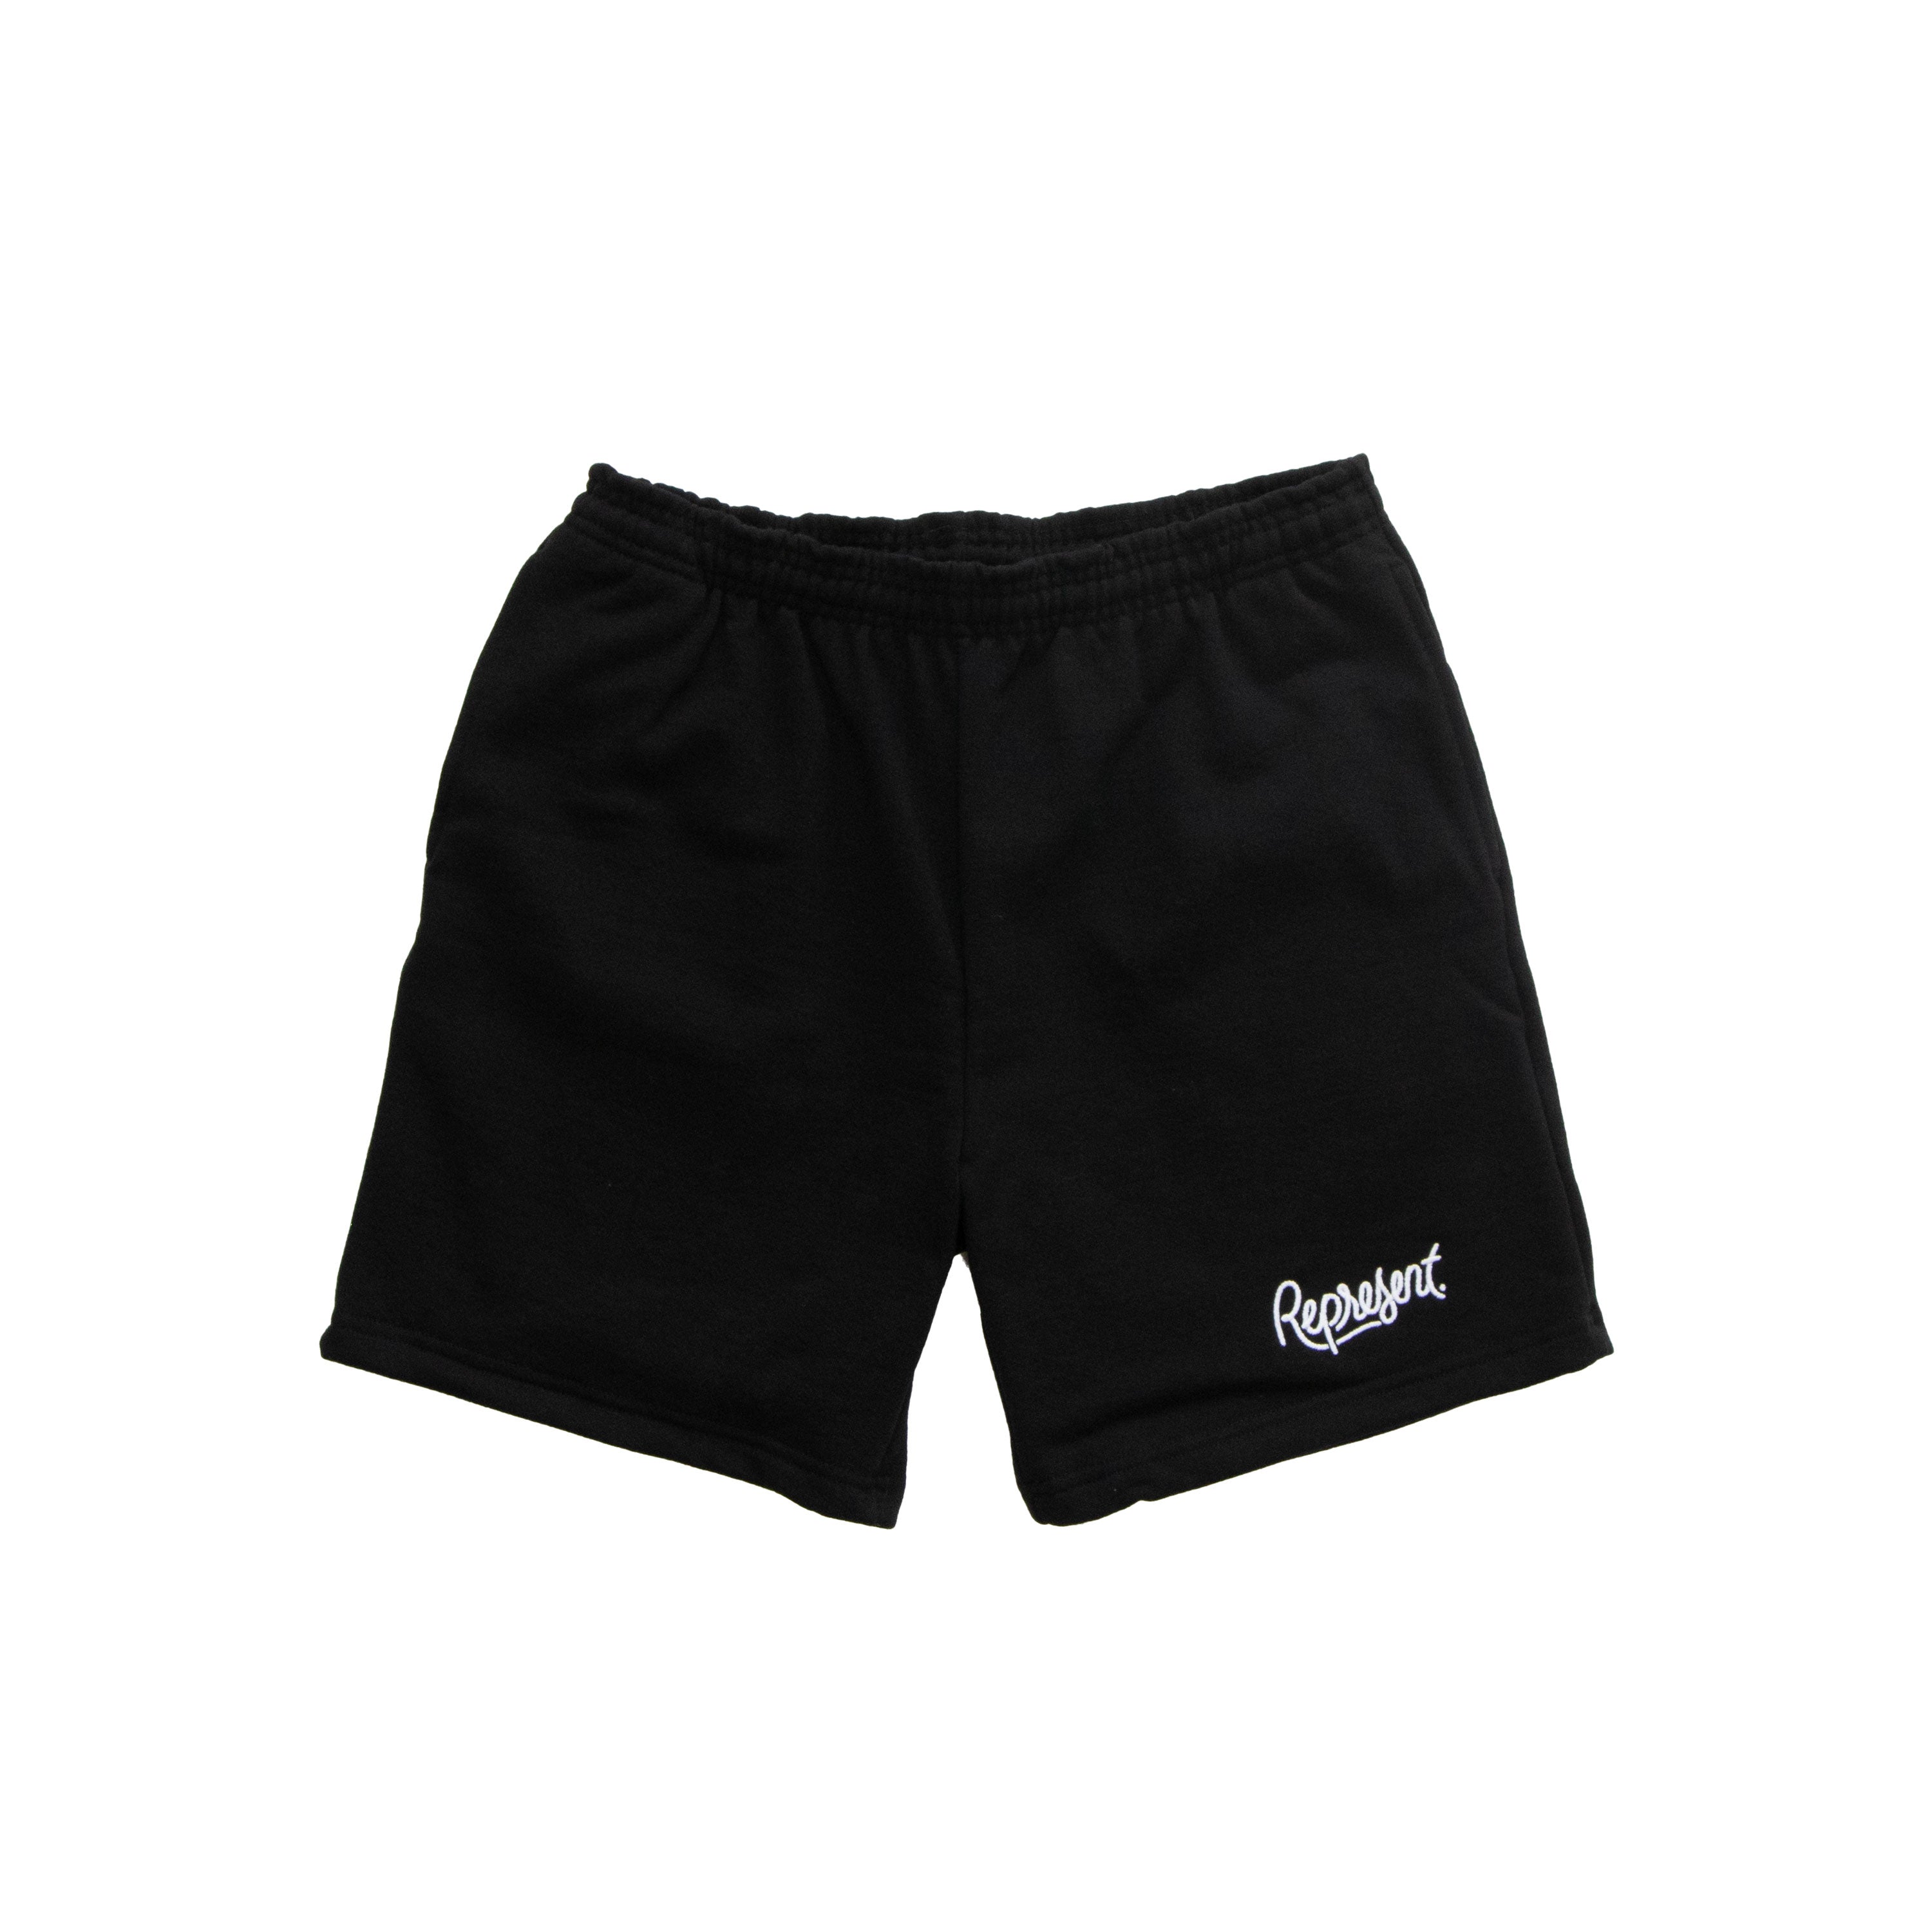 Represent Black Embroidered Shorts – The Represent Store